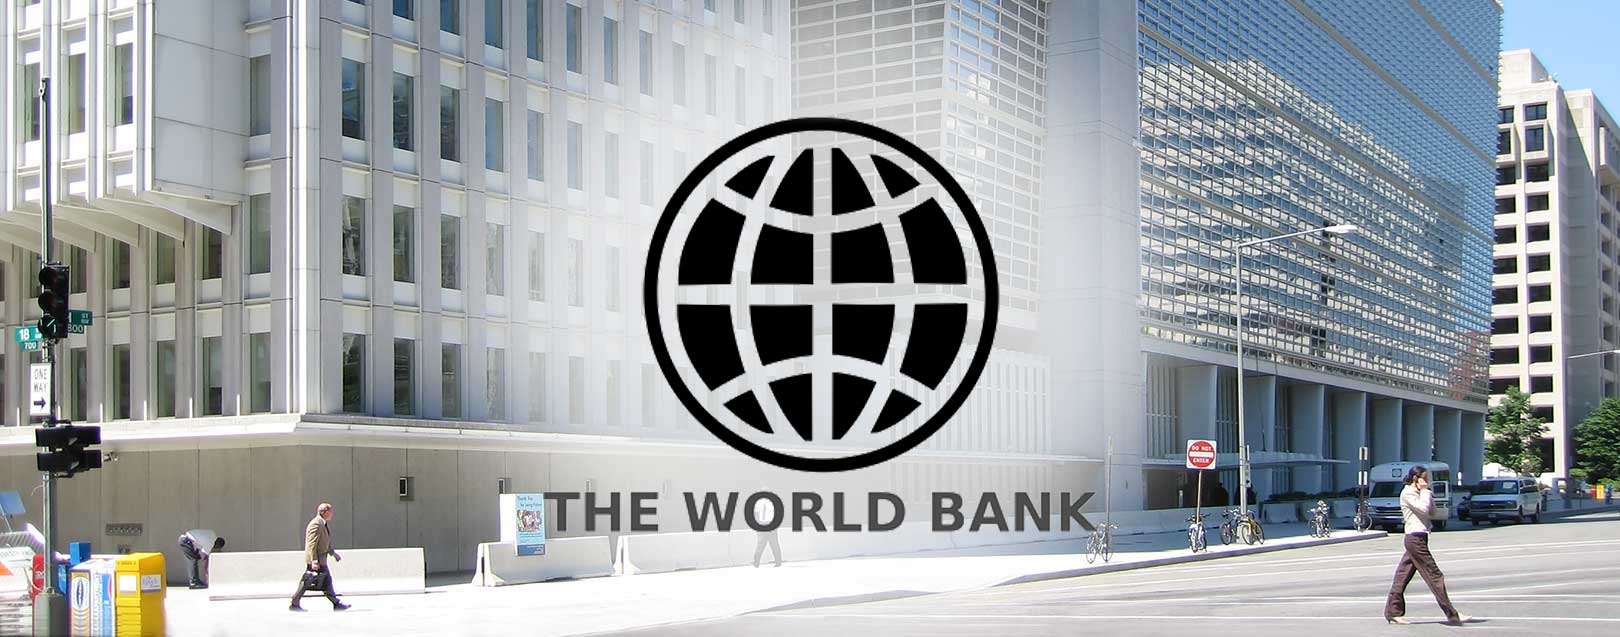 India's GDP growth to remain strong: World Bank